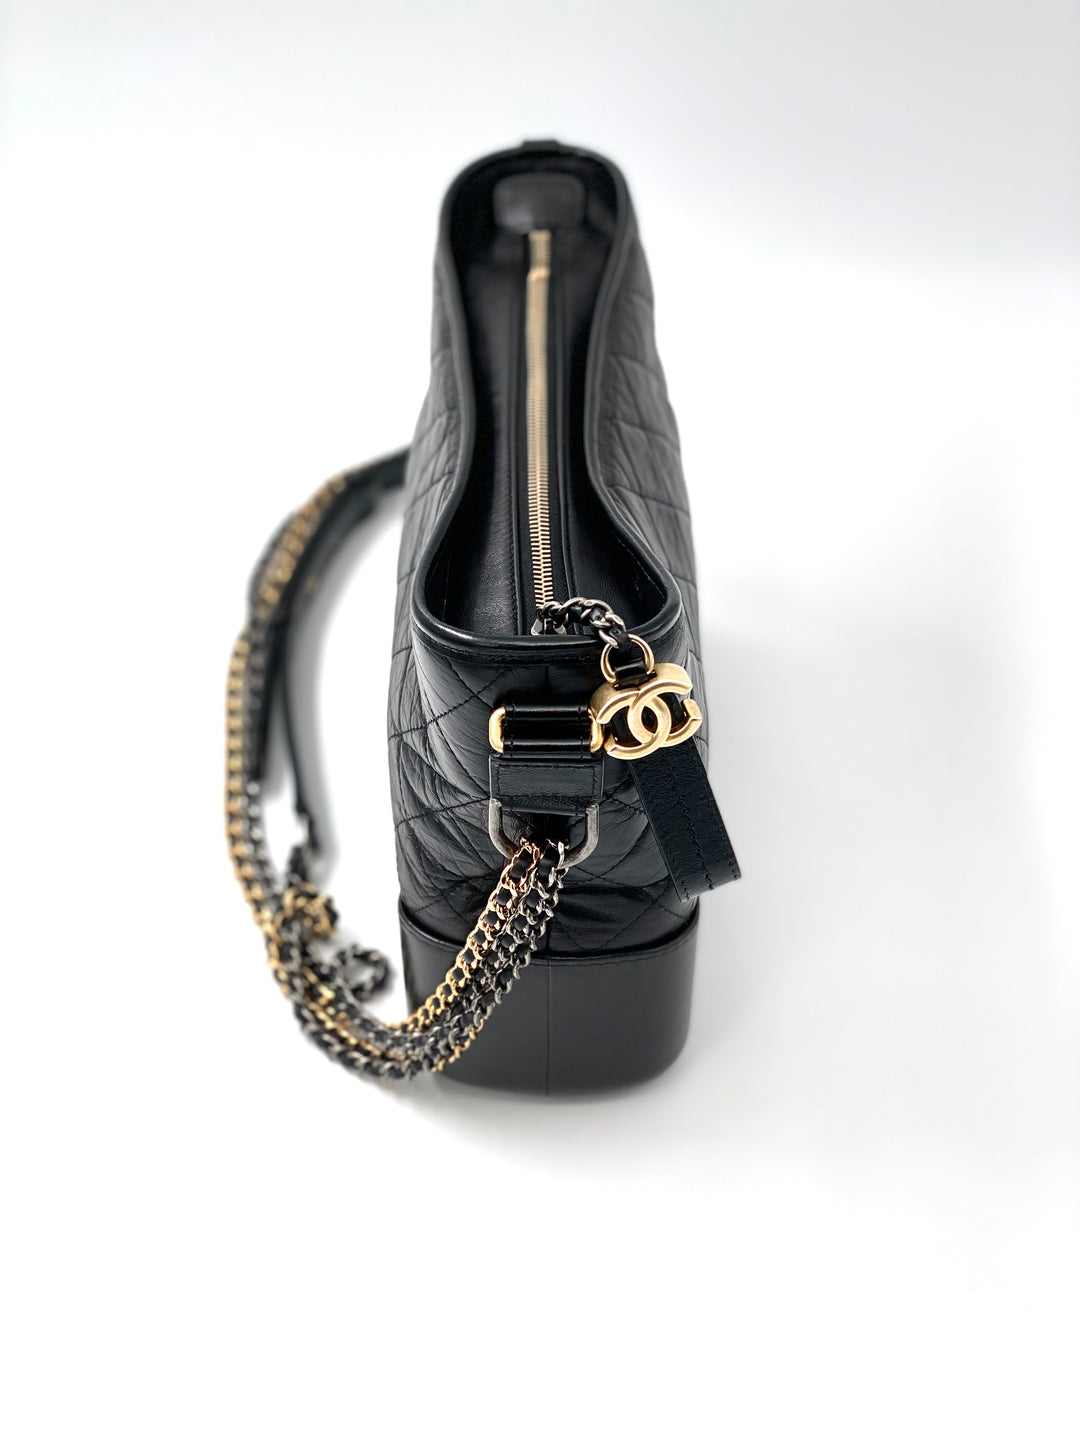 Chanel Gabrielle shoulder bag in black quilted leather